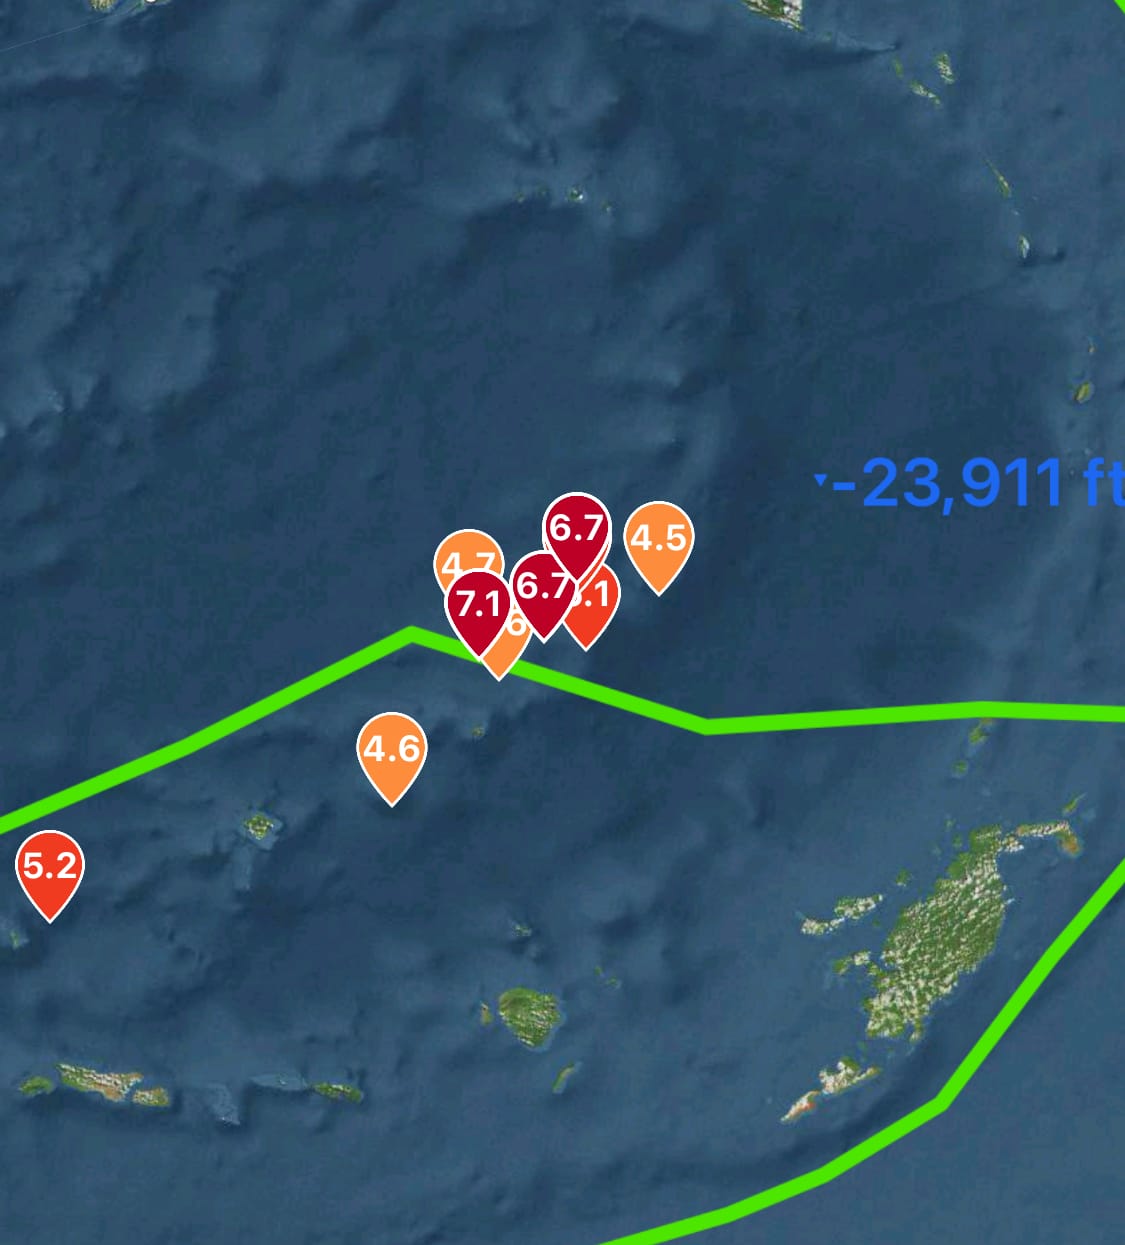 DEVELOPING: Swarm of powerful earthquakes happening in the Banda Sea